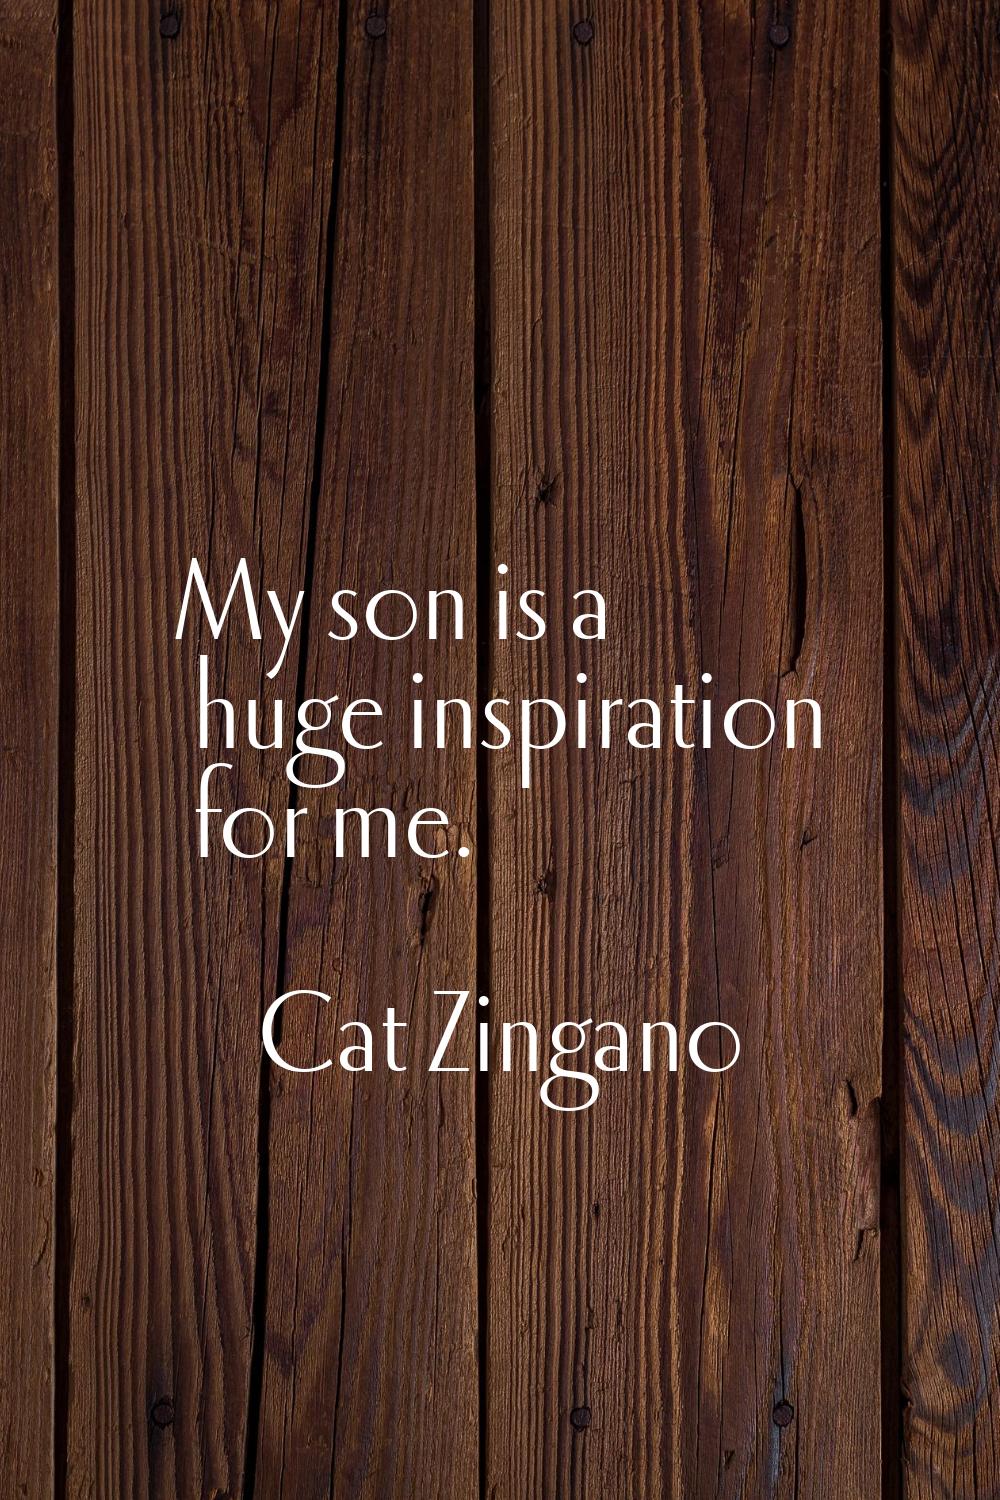 My son is a huge inspiration for me.